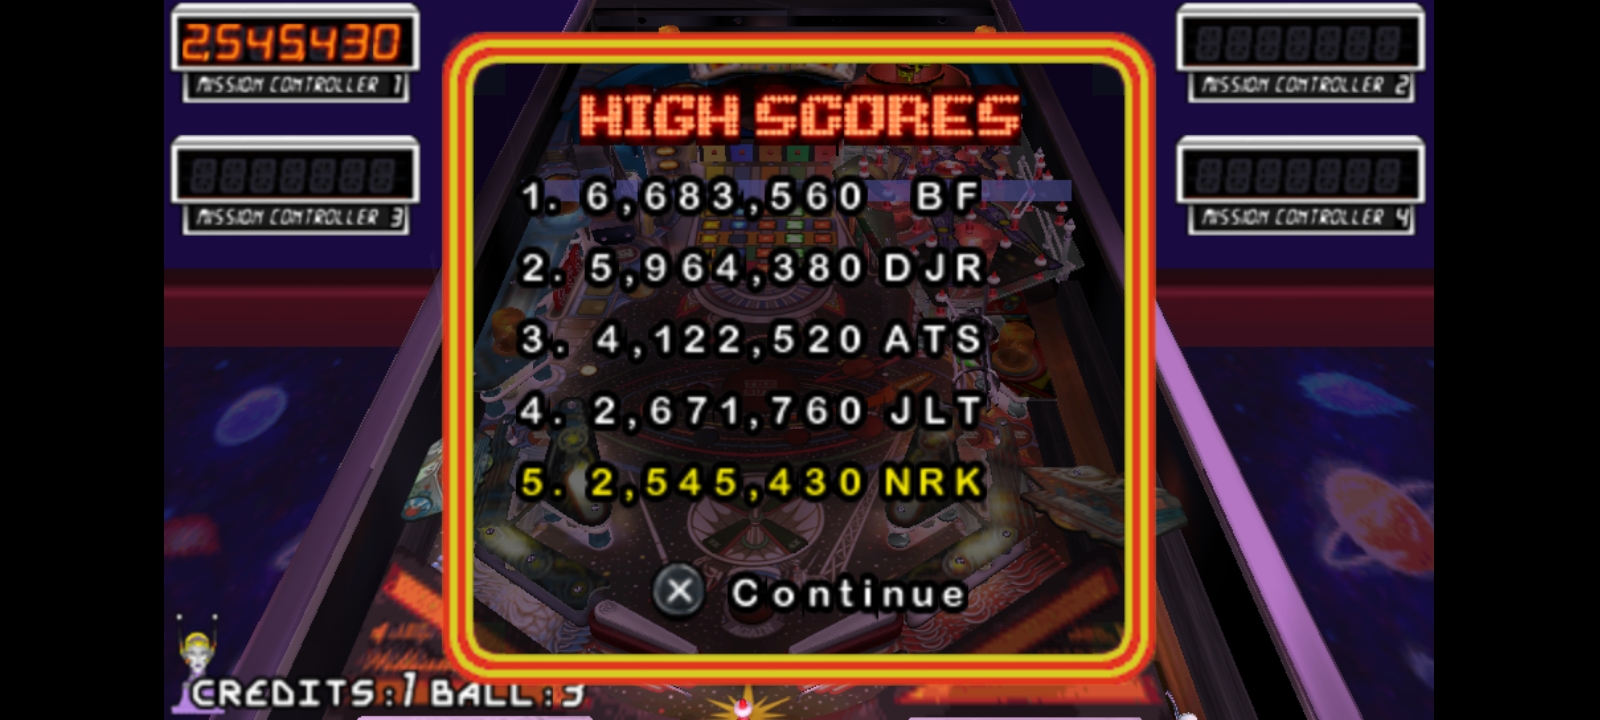 Hauntedprogram: Pinball Hall Of Fame: The Williams Collection: Pin*Bot (PSP Emulated) 2,545,430 points on 2022-07-21 22:58:14